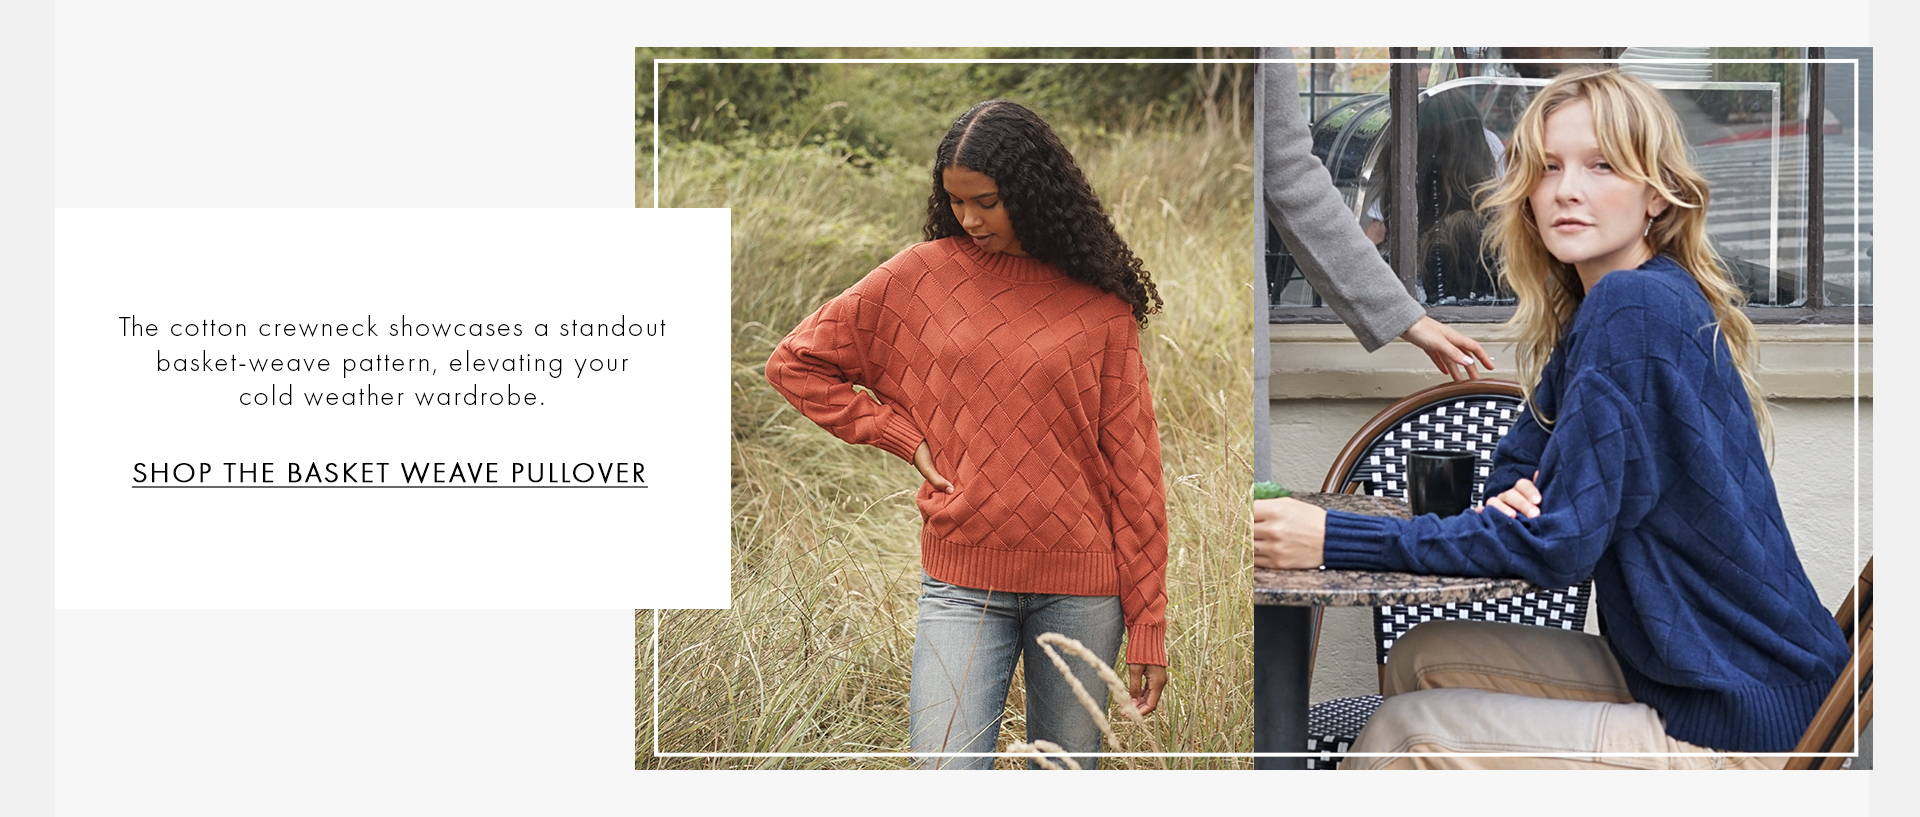 The cotton crewneck showcases a standout basket-weave pattern, elevating your cold weather wardrobe texts on the image with one model wearing a orange basket-weave pullover and another model wearing a blue basket-weave pullover sitting on a chair.